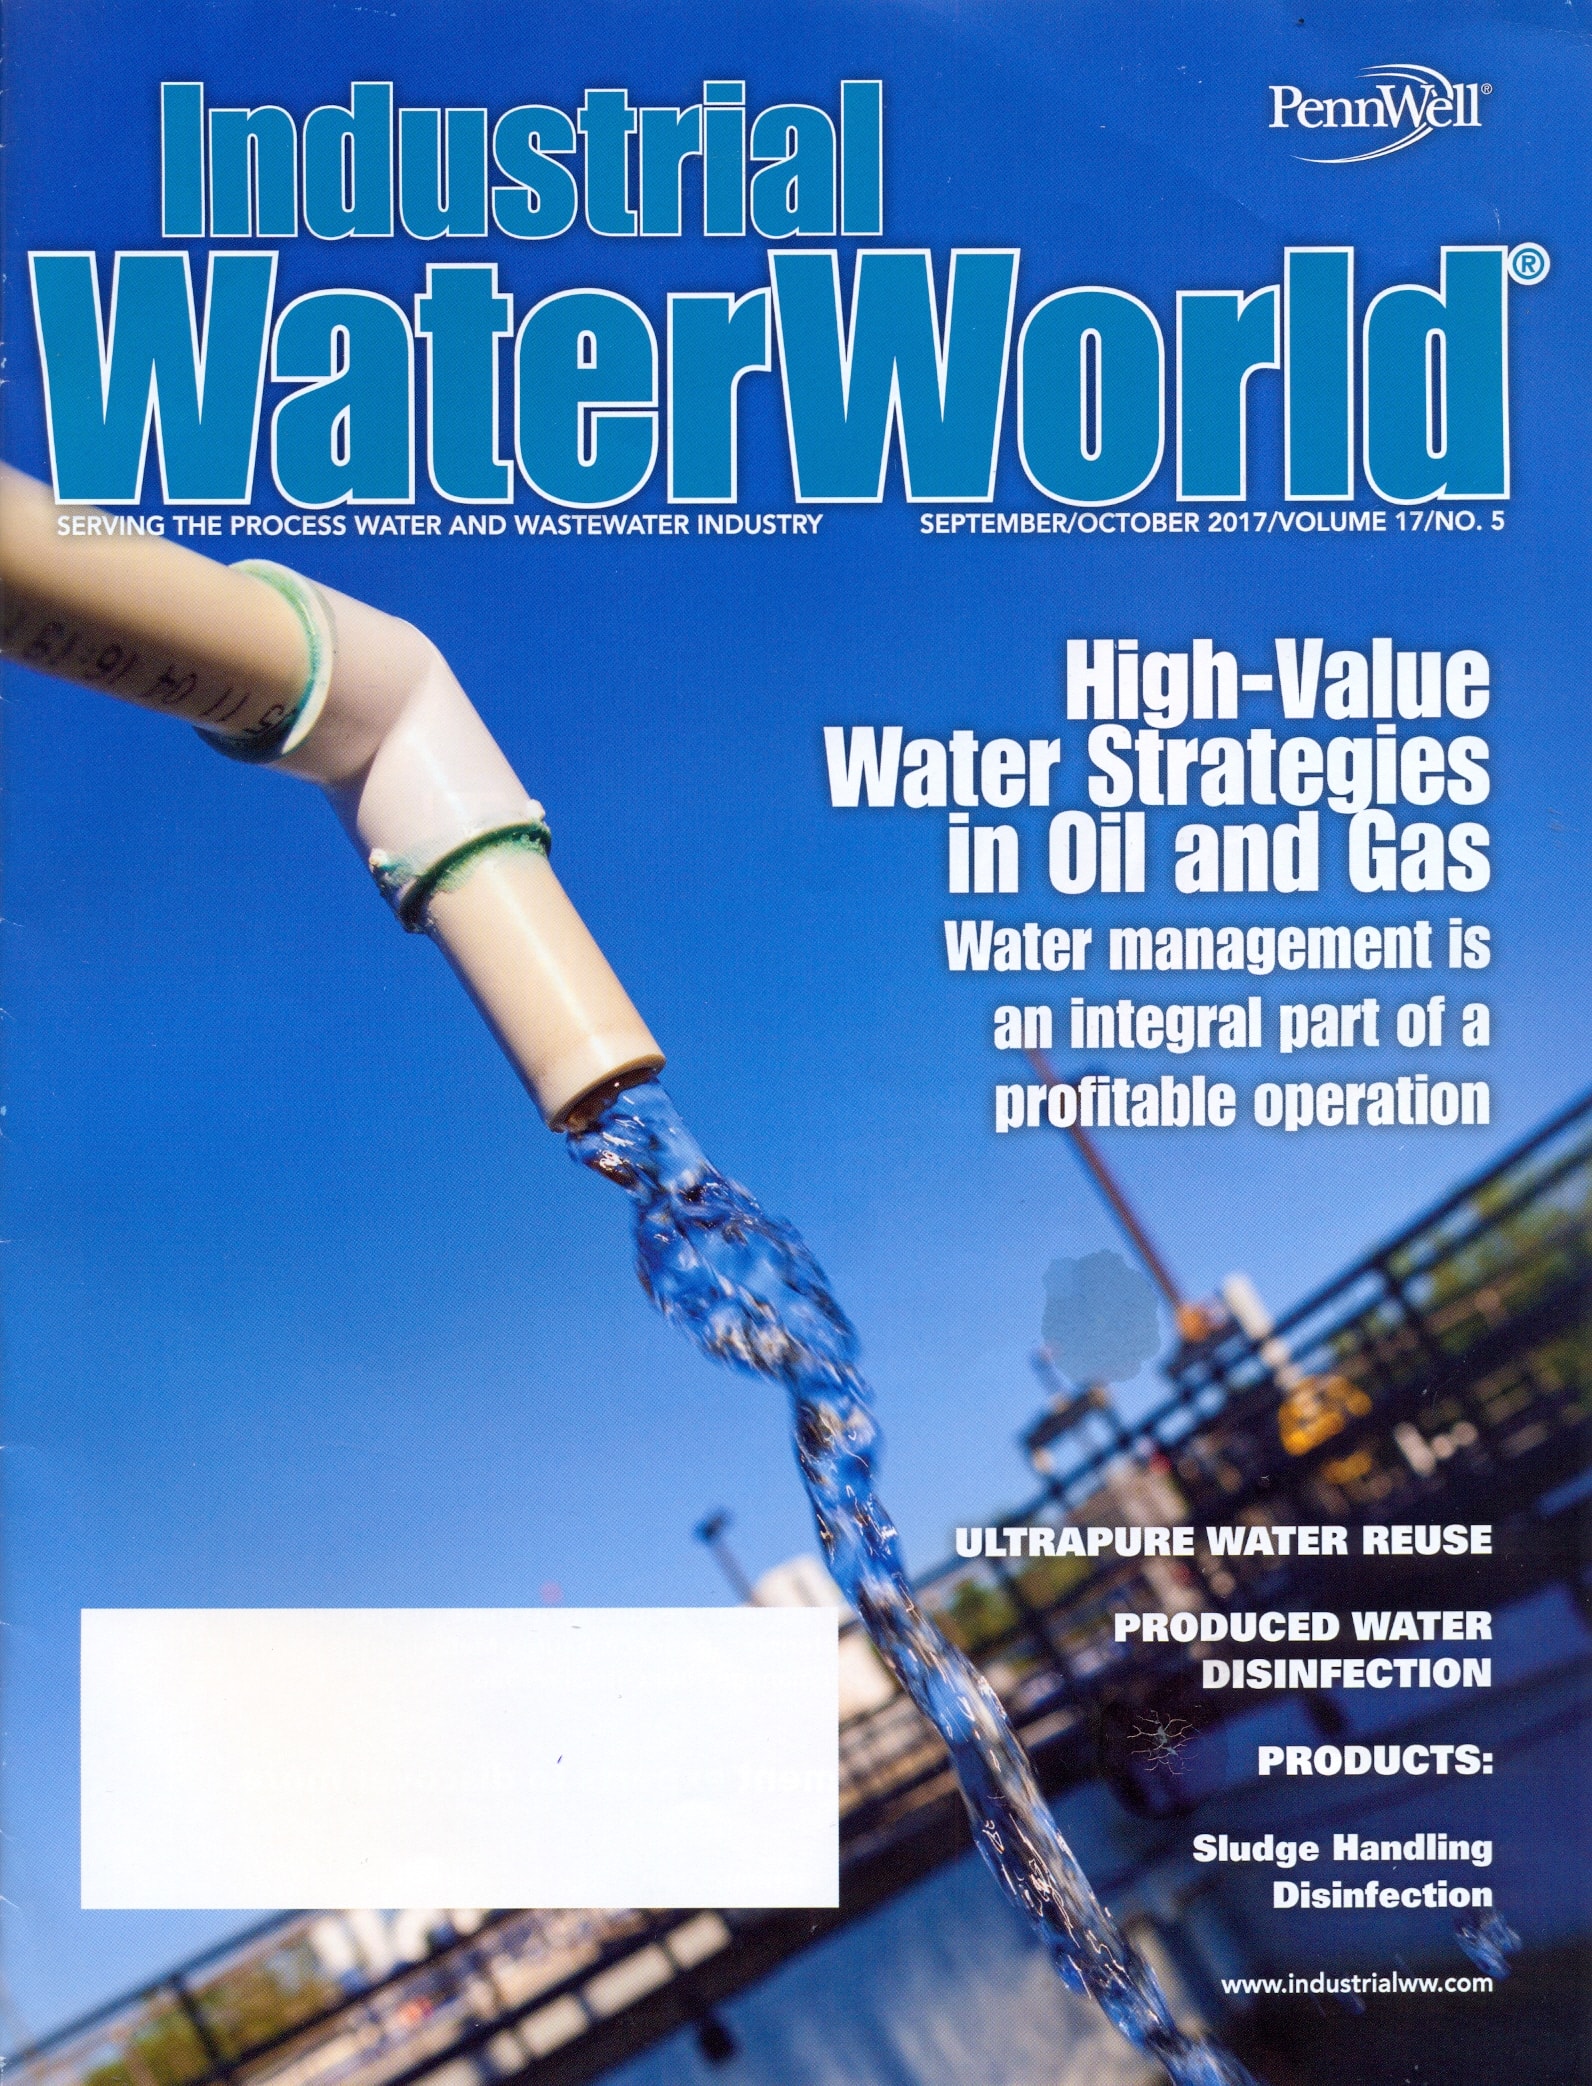 The fifth issue for 2017 of &ldquo;Industrial WaterWorld&rdquo; magazine published an article entitled &ldquo;Decontamination of Oily Wastewater Using Elect...